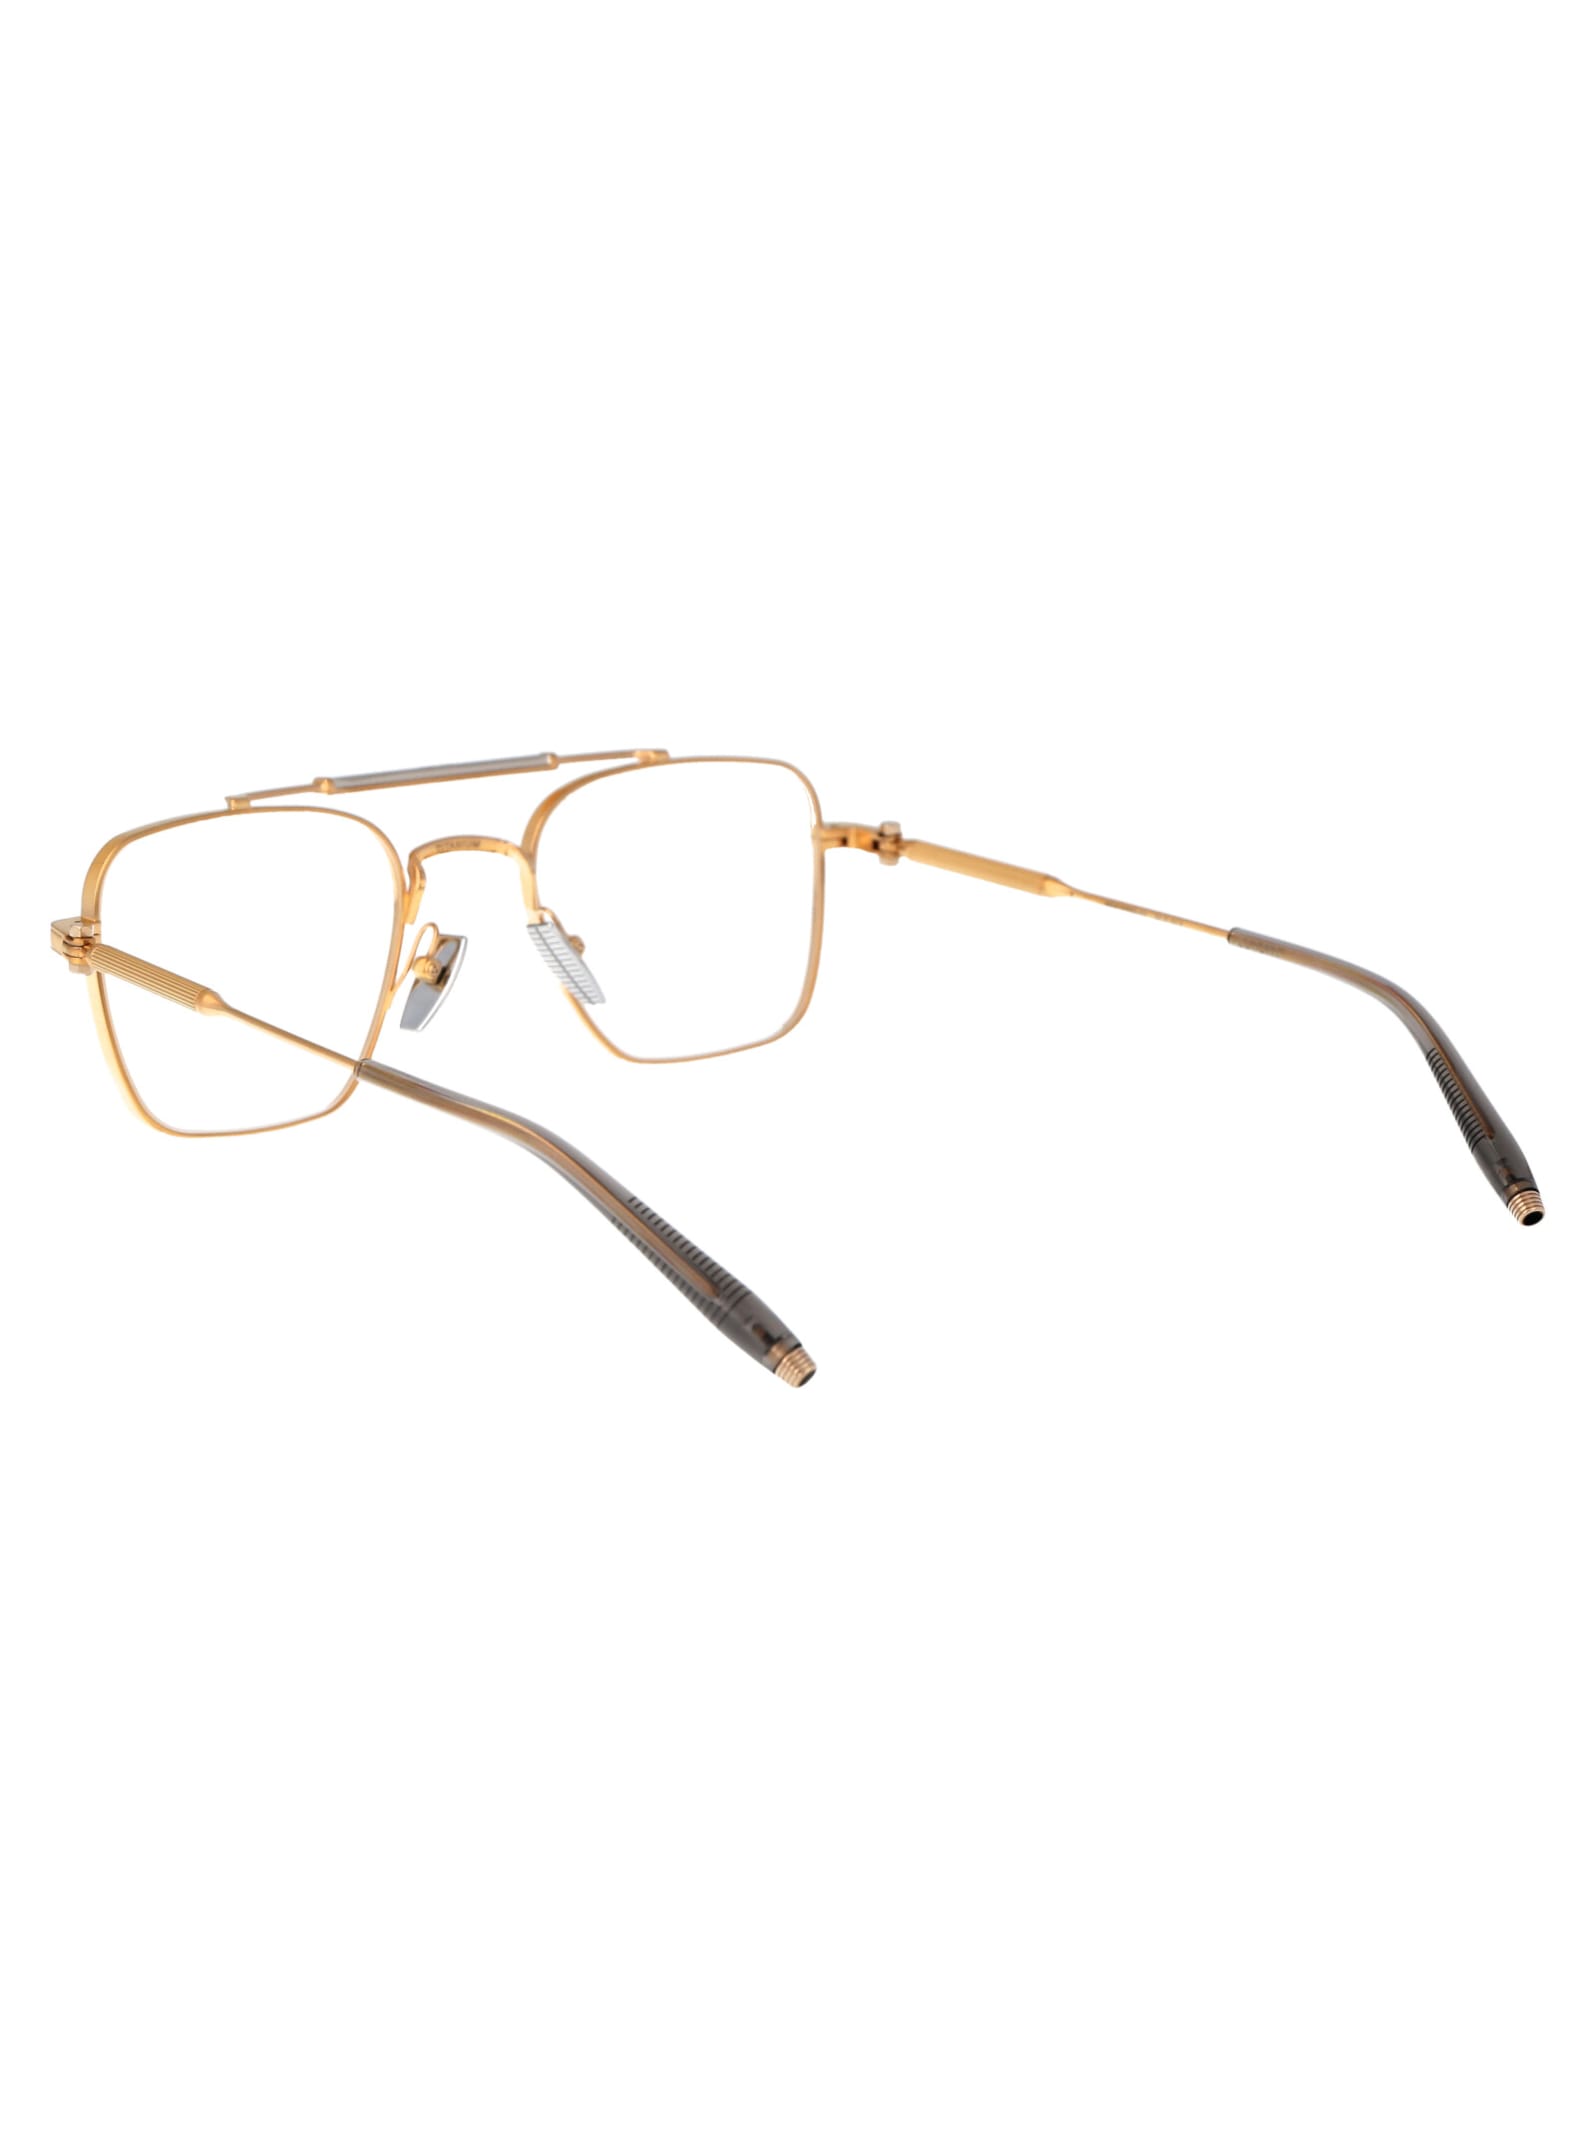 Shop Akoni Europa Glasses In Brushed Gold And Silver- Grey Crystal